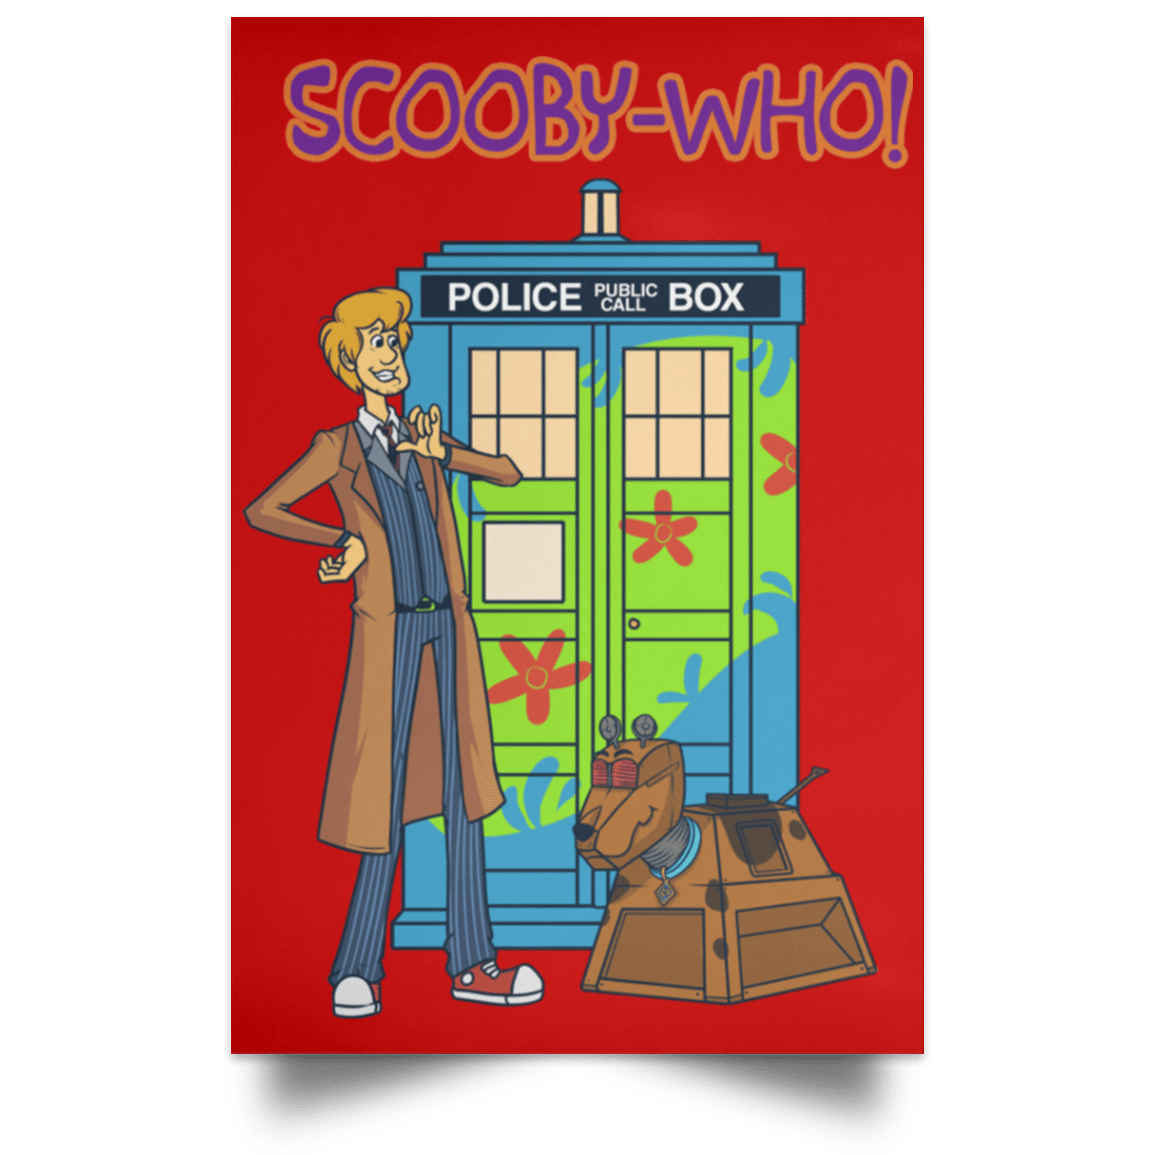 Scooby-Who! Portrait Poster